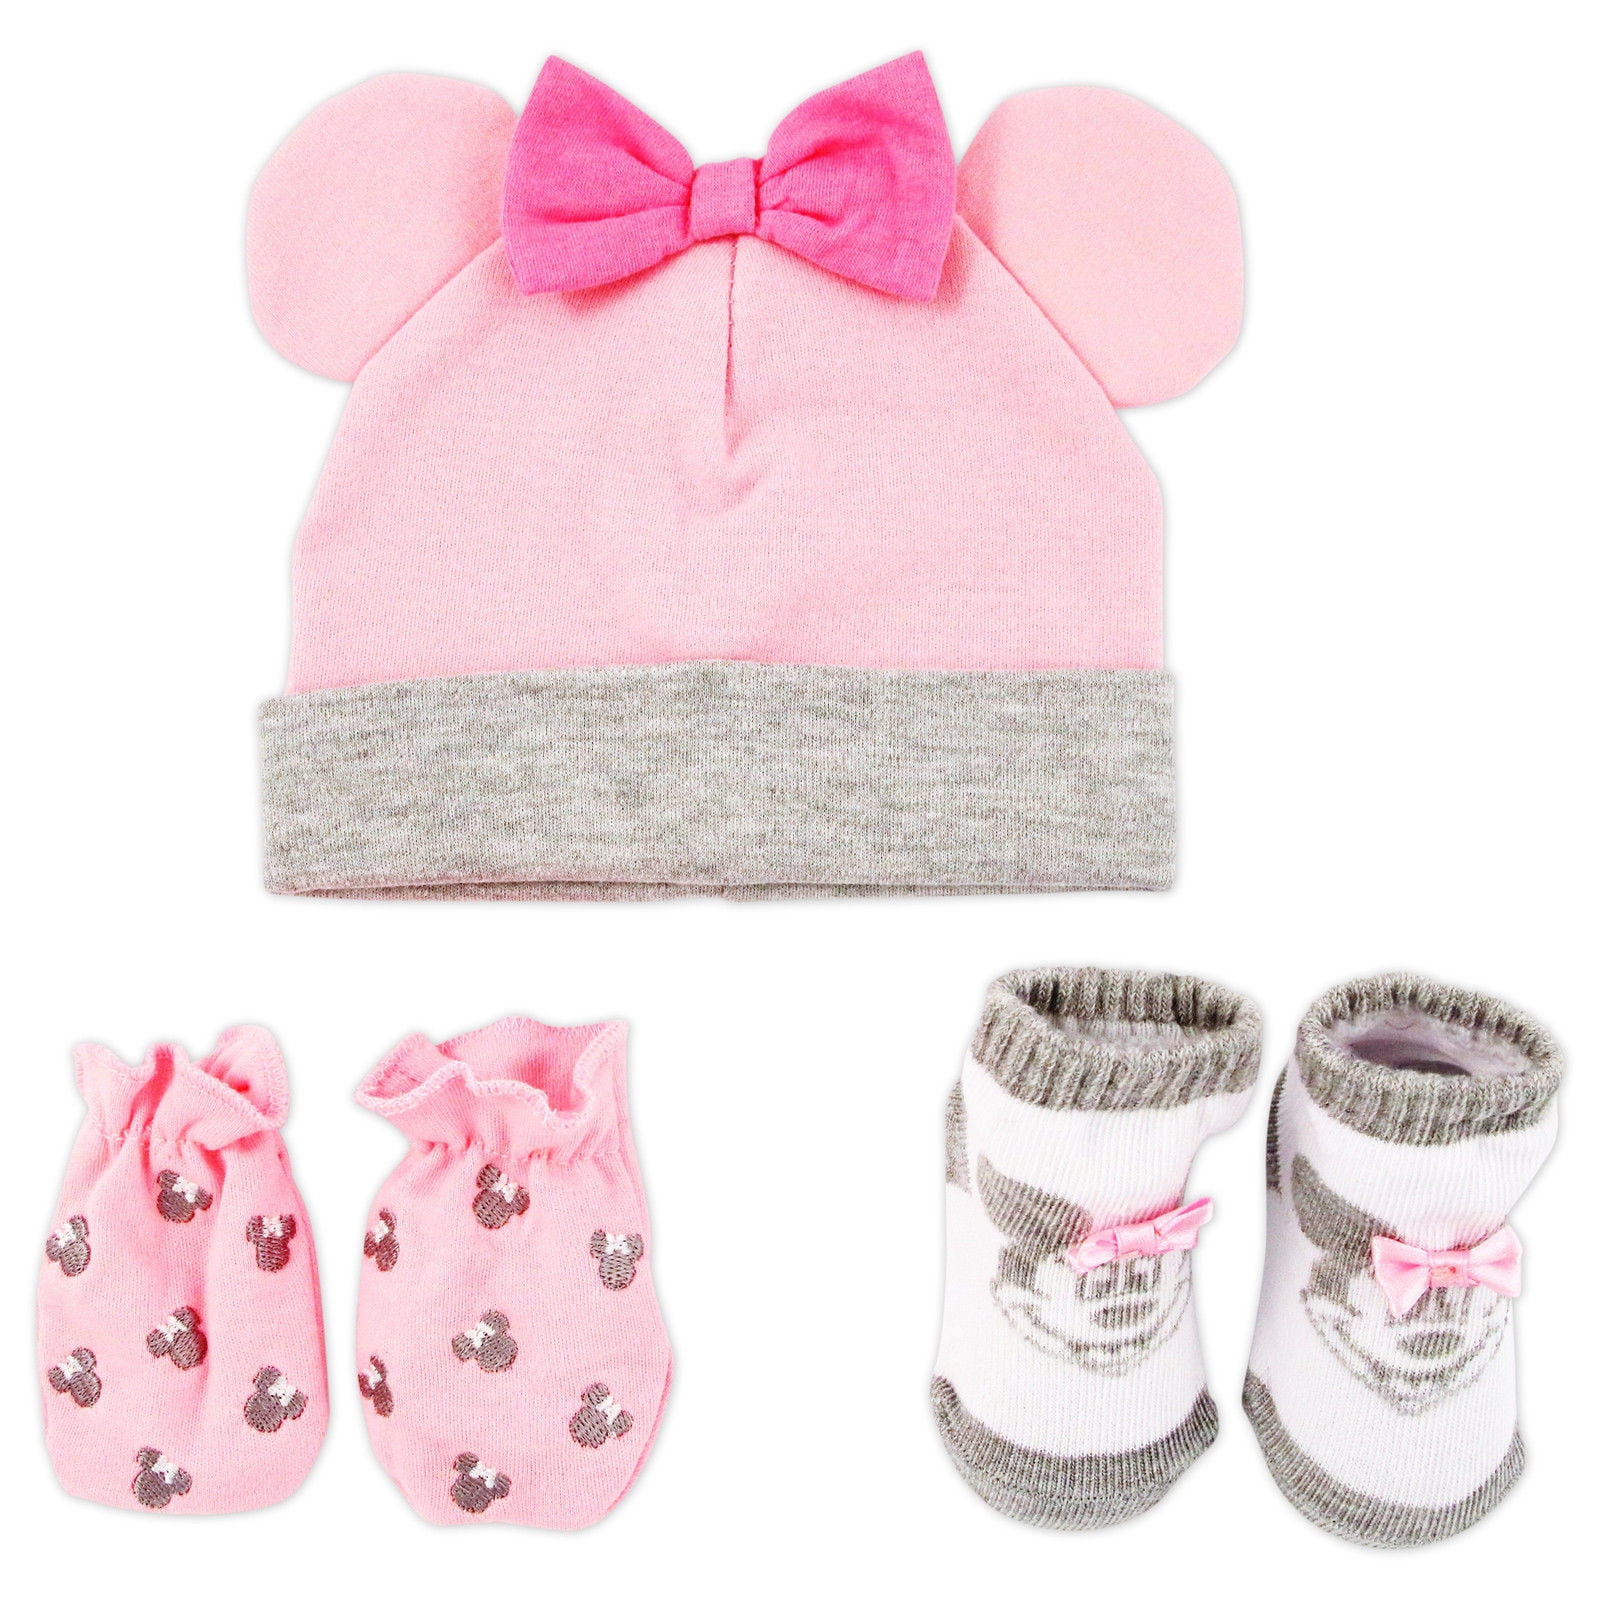 NEWBORN BABY GIRL comfy beanie hat with socks and mittens Baby shower gift set 